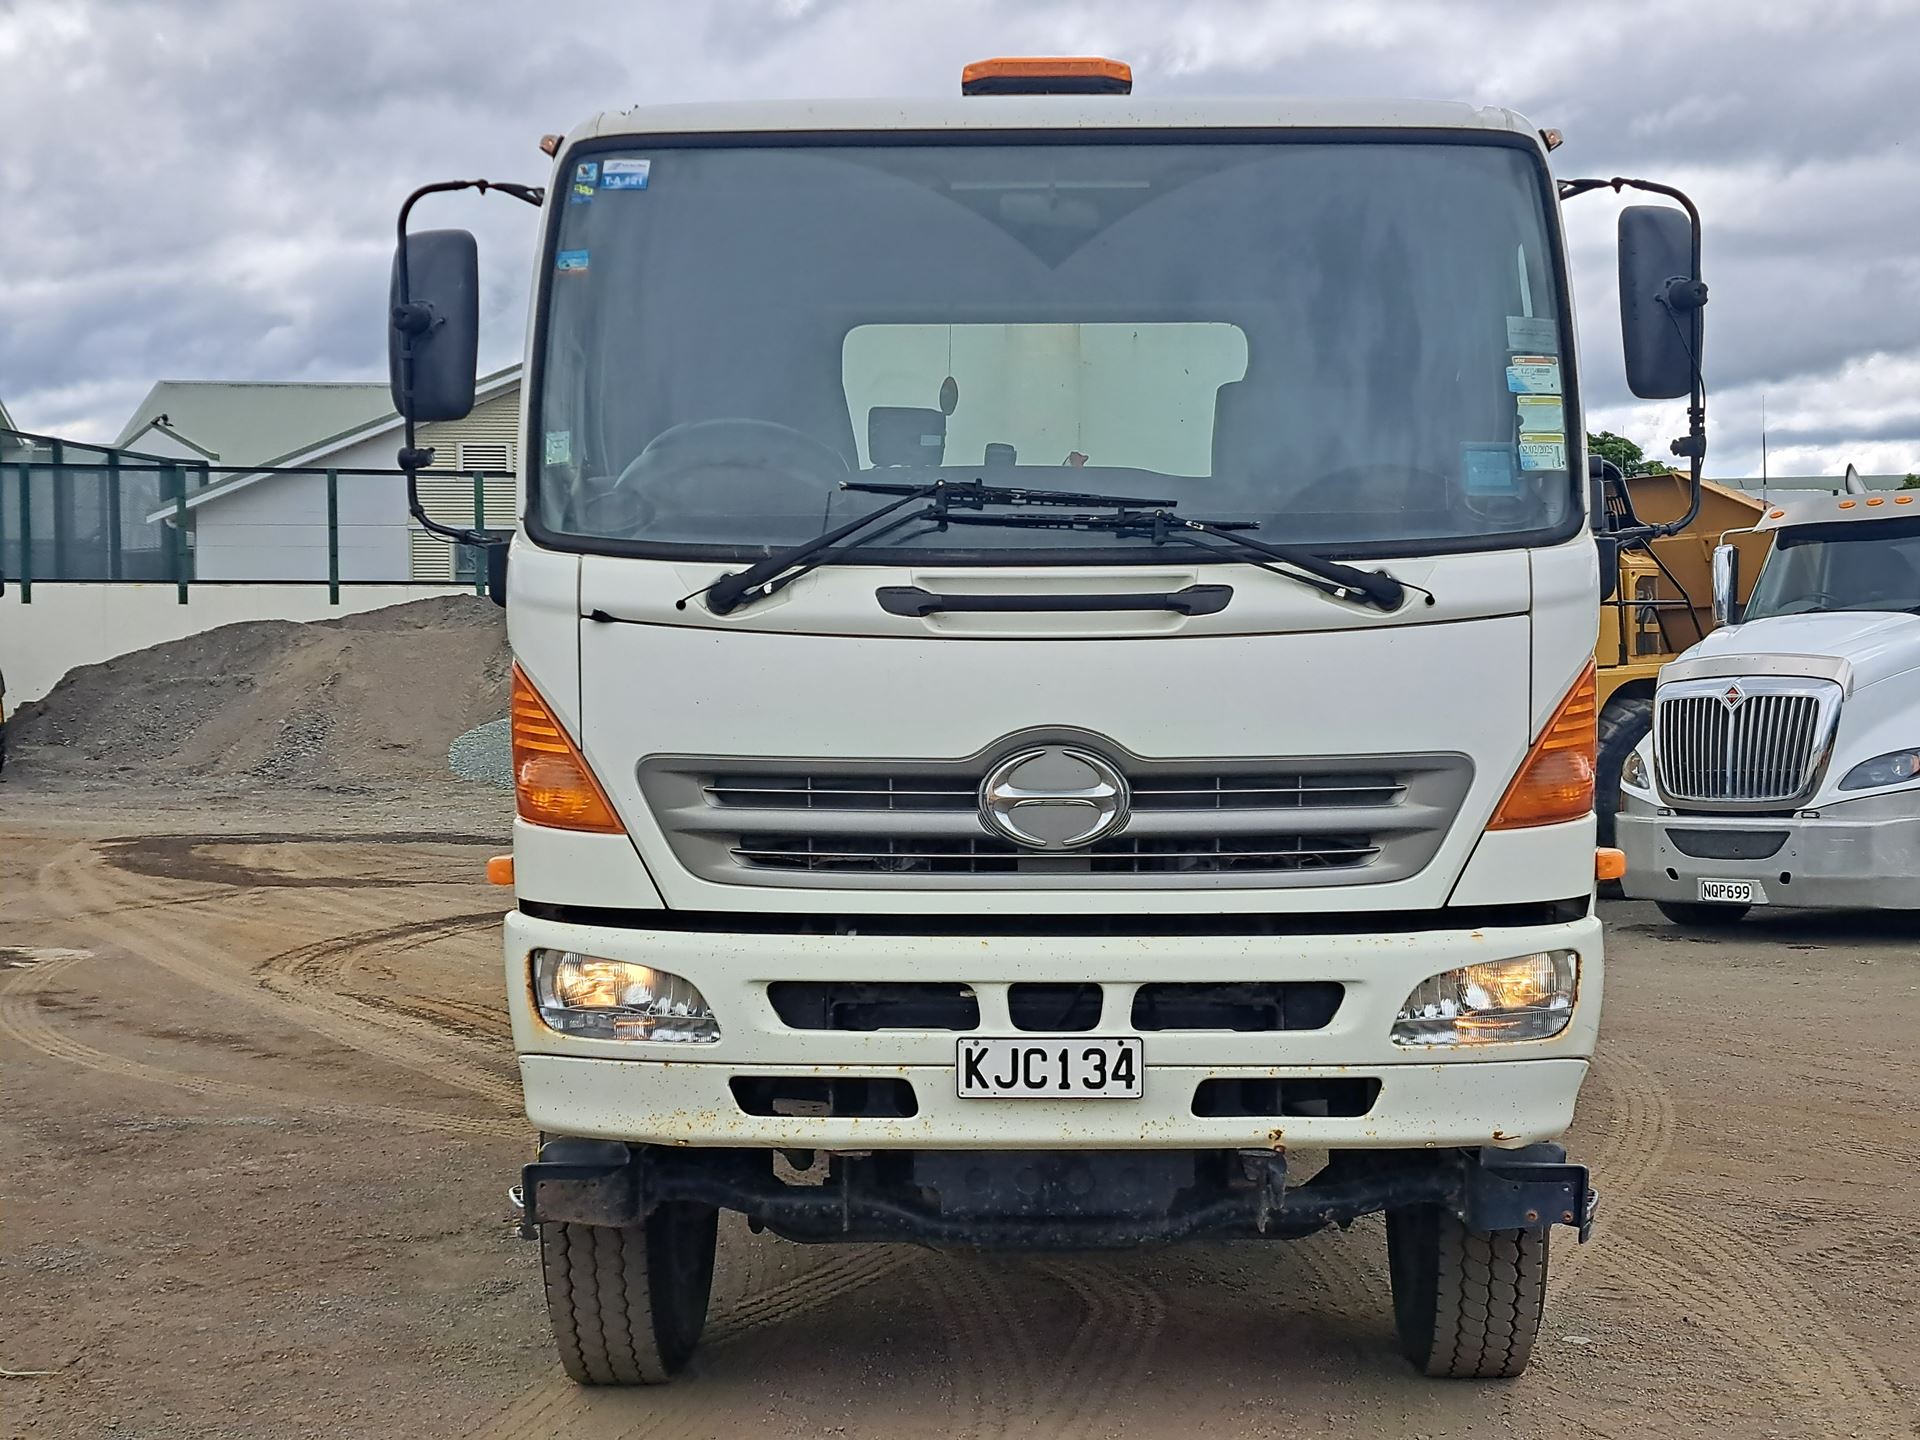 Picture of 2009 Hino 500 Tipper